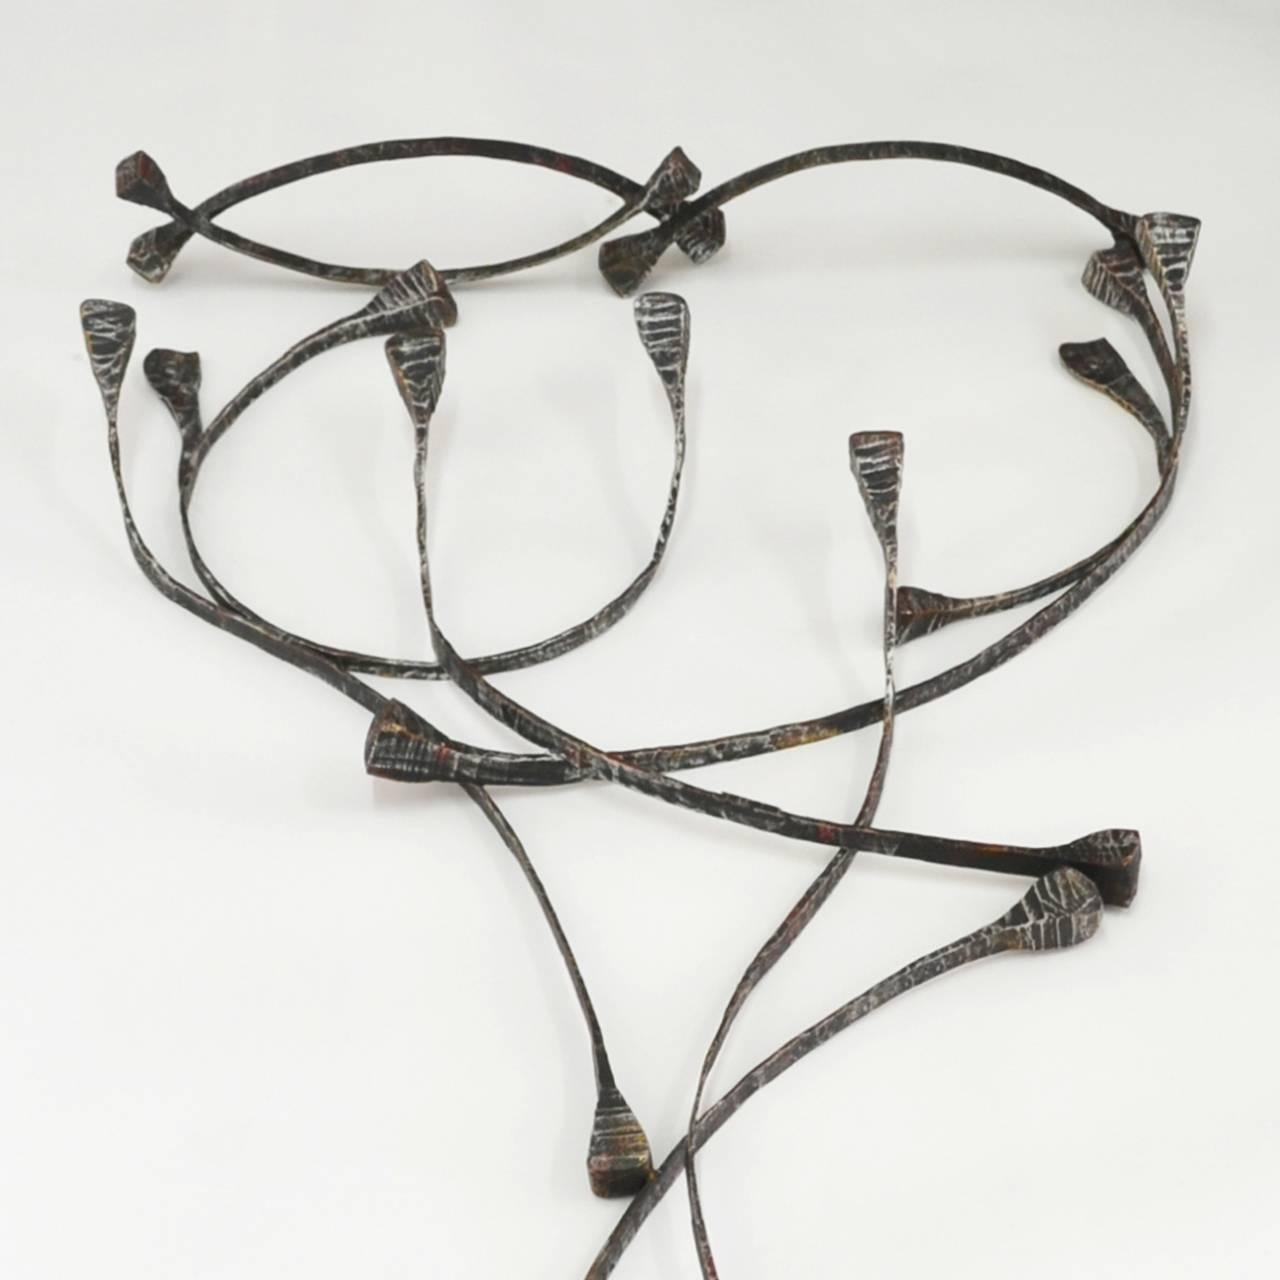 Italian sculptural metal coat stands from the 1960s. Signed by Marsura.
It is part of complete entrance hall set. Mirror, coats hooks, umbrella stand, and wall light are available.